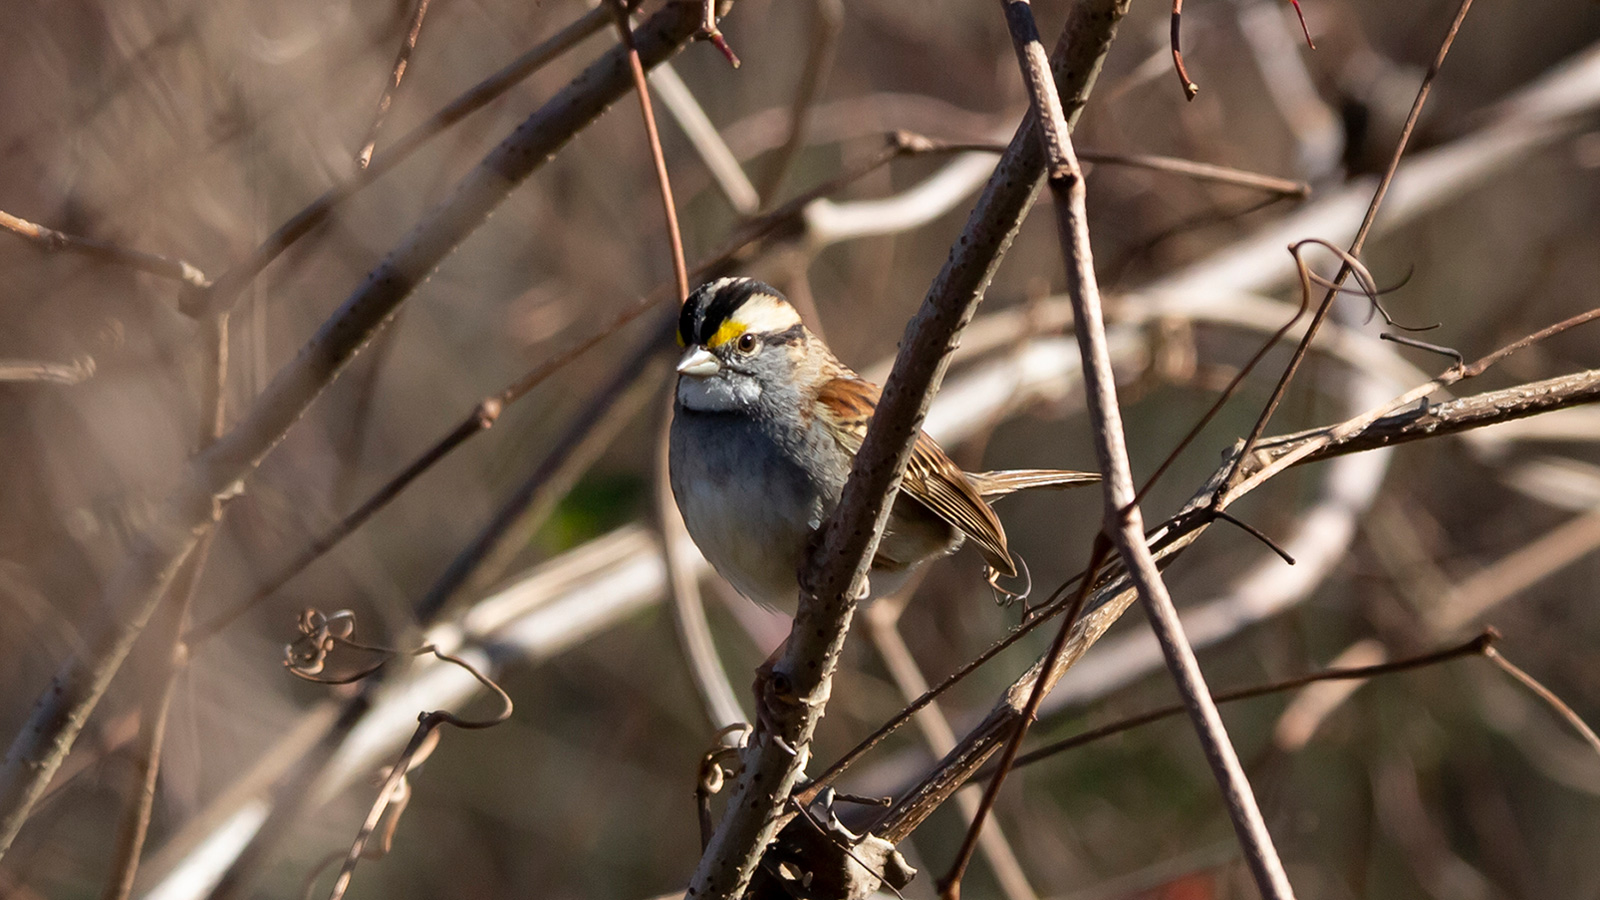 White-throated sparrow looking out from its perch on a branch